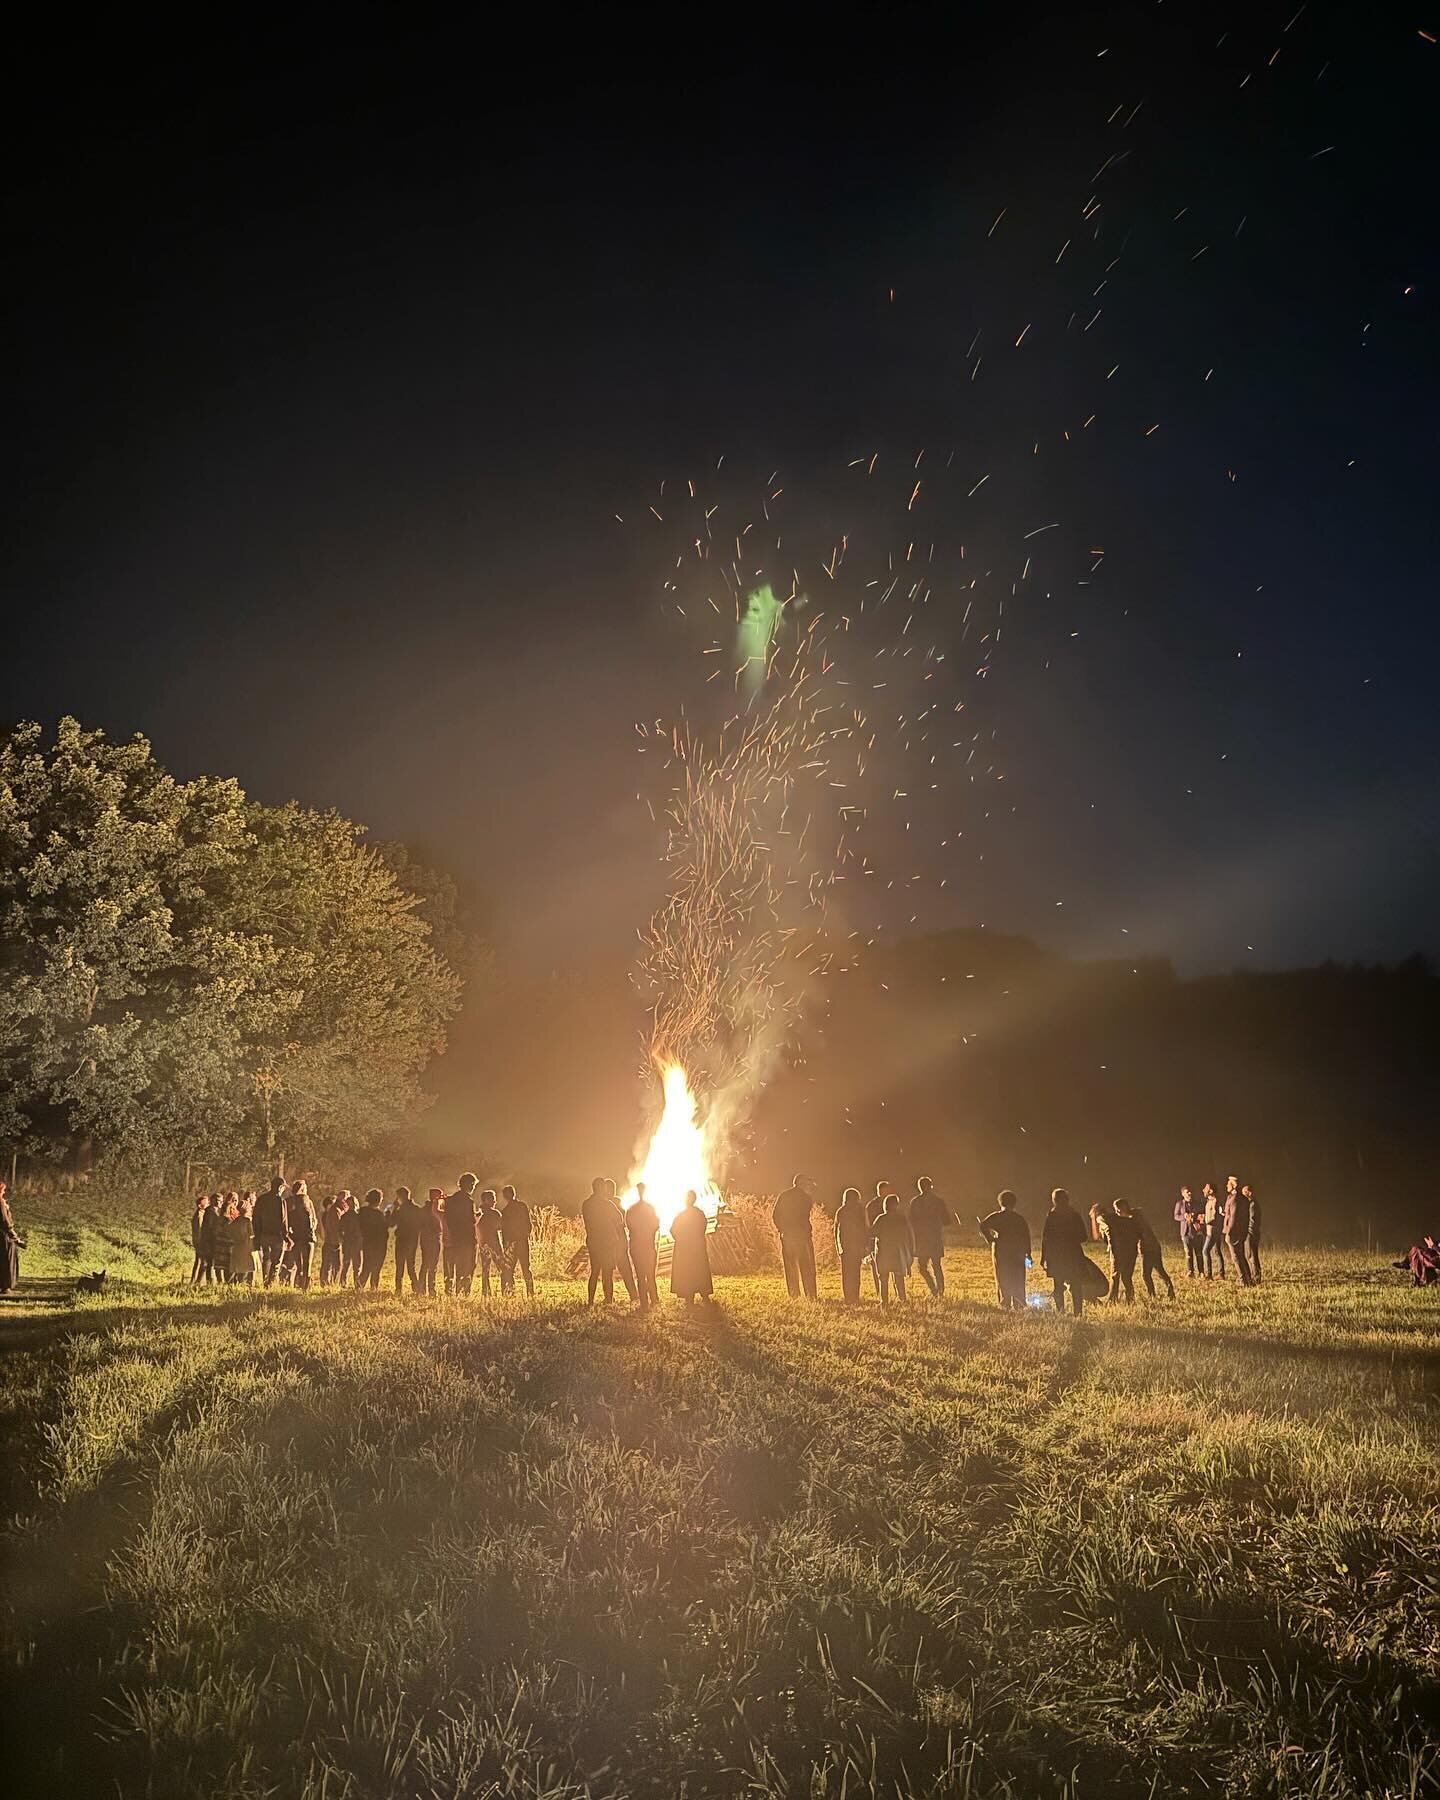 Our favorite tradition taking time to reflect on harvest and welcome a beautiful autumn season! 
&bull;
&bull;
&bull;
#hudsonvalley #hudsonchathamwinery #biodynamicfarming #harvest #bonfire #hudsonny #upstateny #upstateandchill